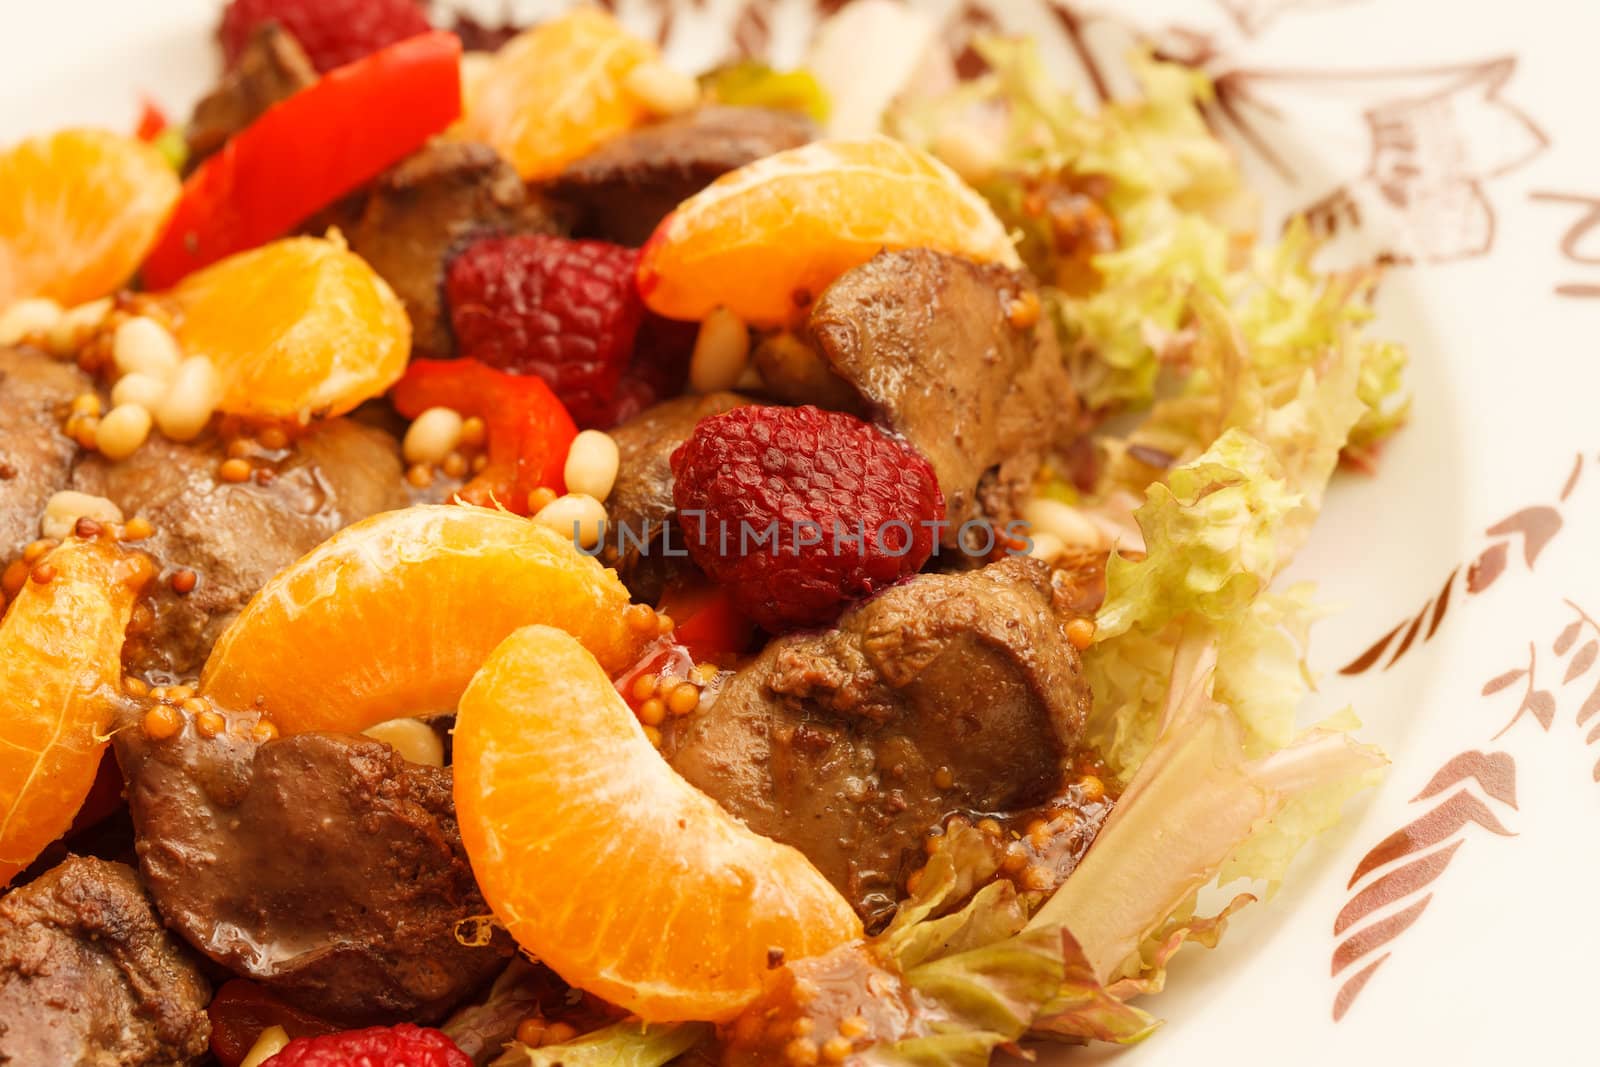 chicken liver with fruits